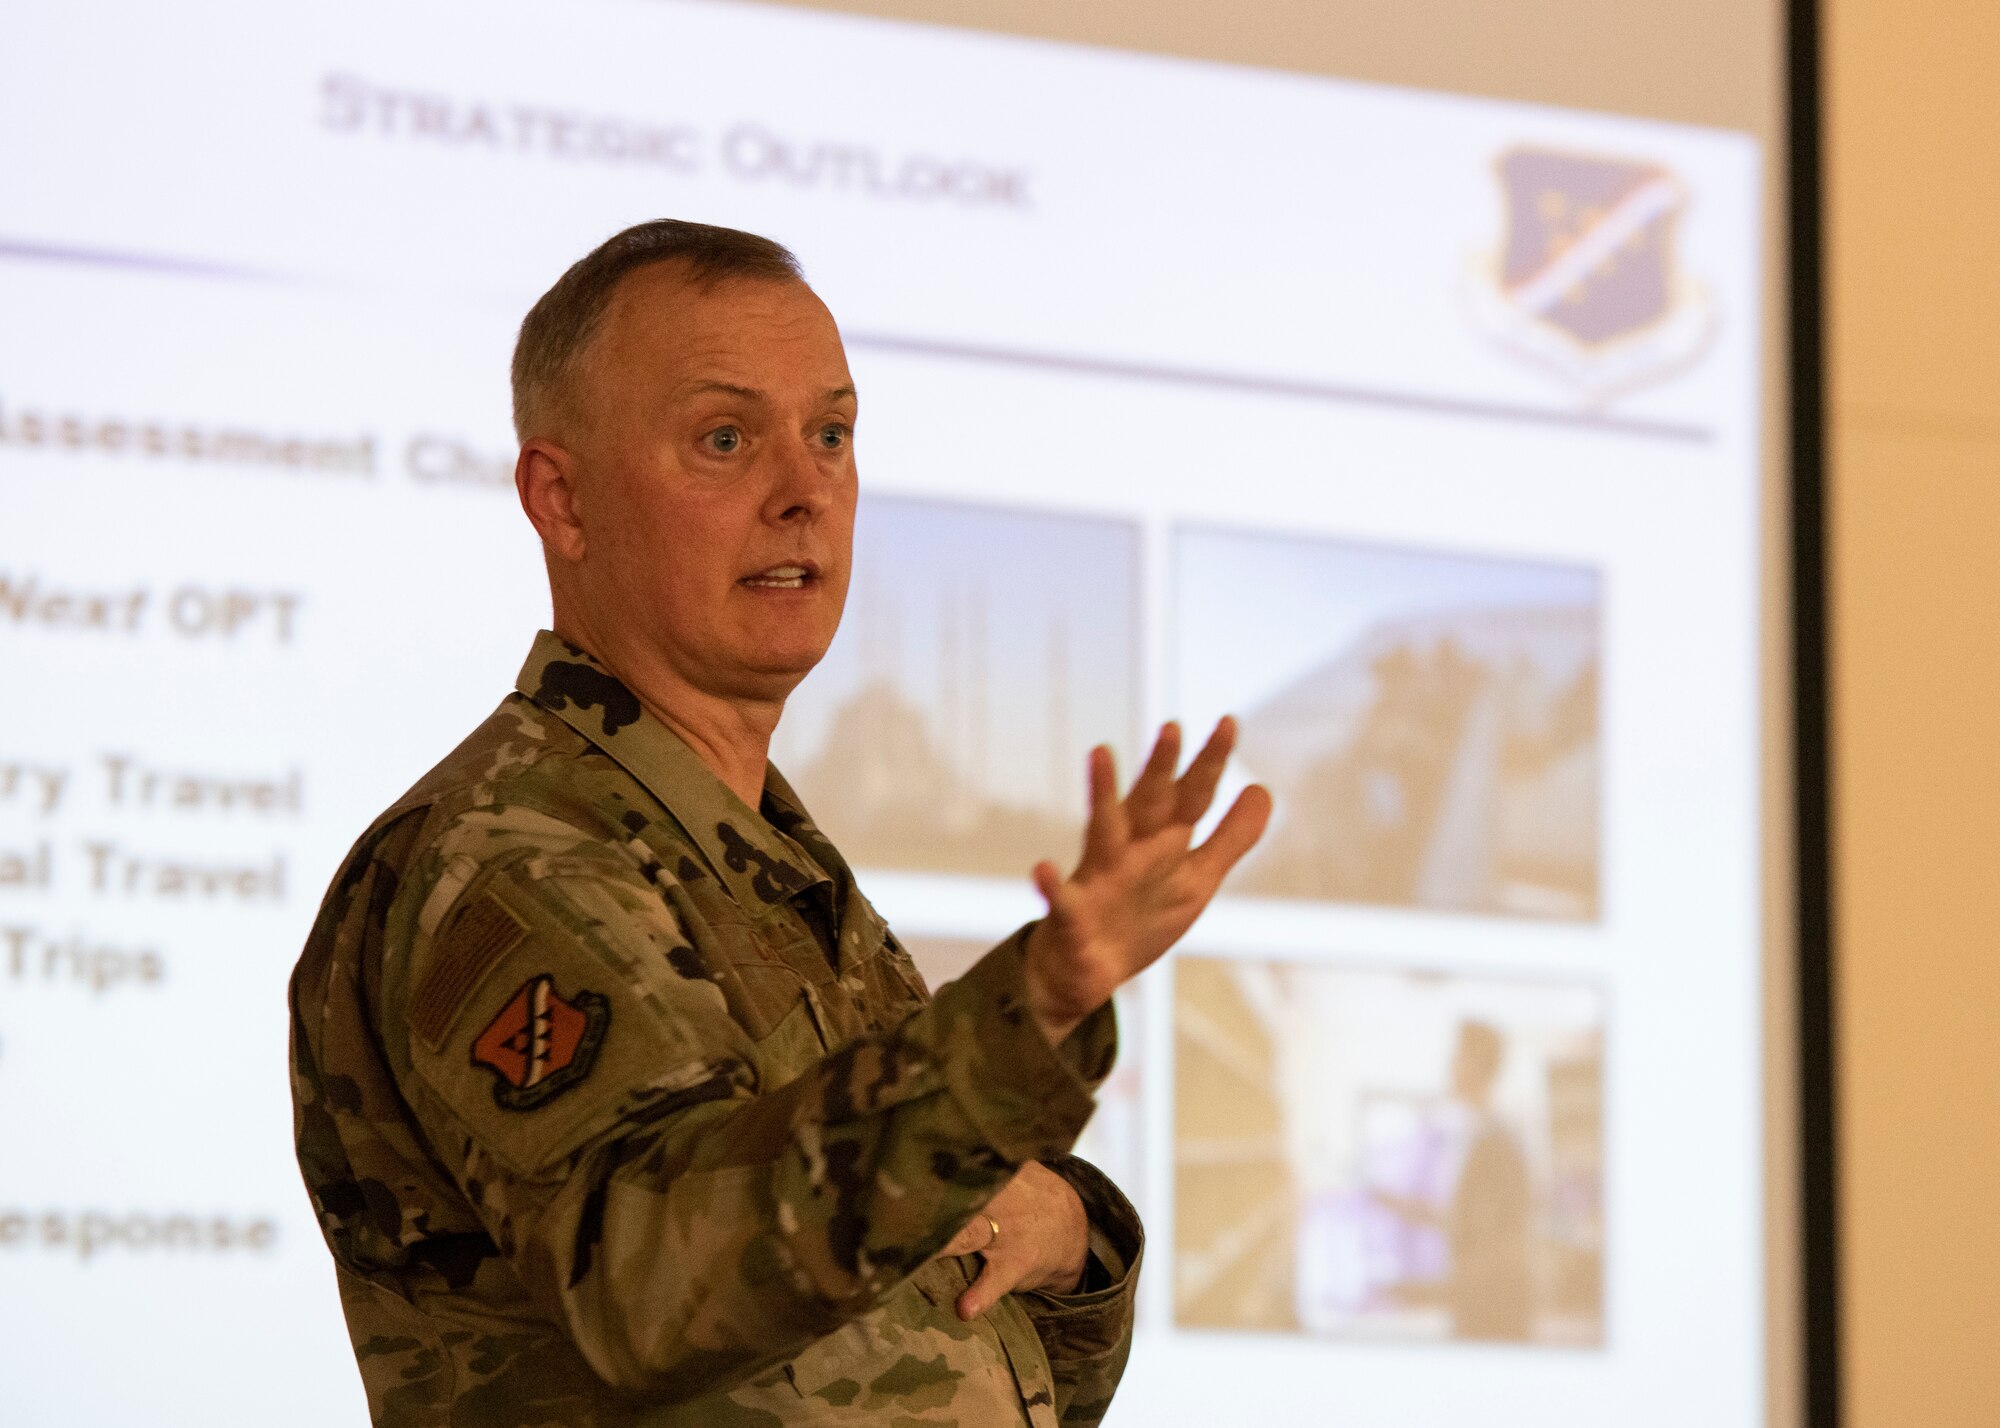 Col. John Creel, 39th Air Base Wing commander, stands in front of a projector screen and talks with gestures to an audience about the projected slide. The slide says "strategic outlook" and contains pictures from various areas.